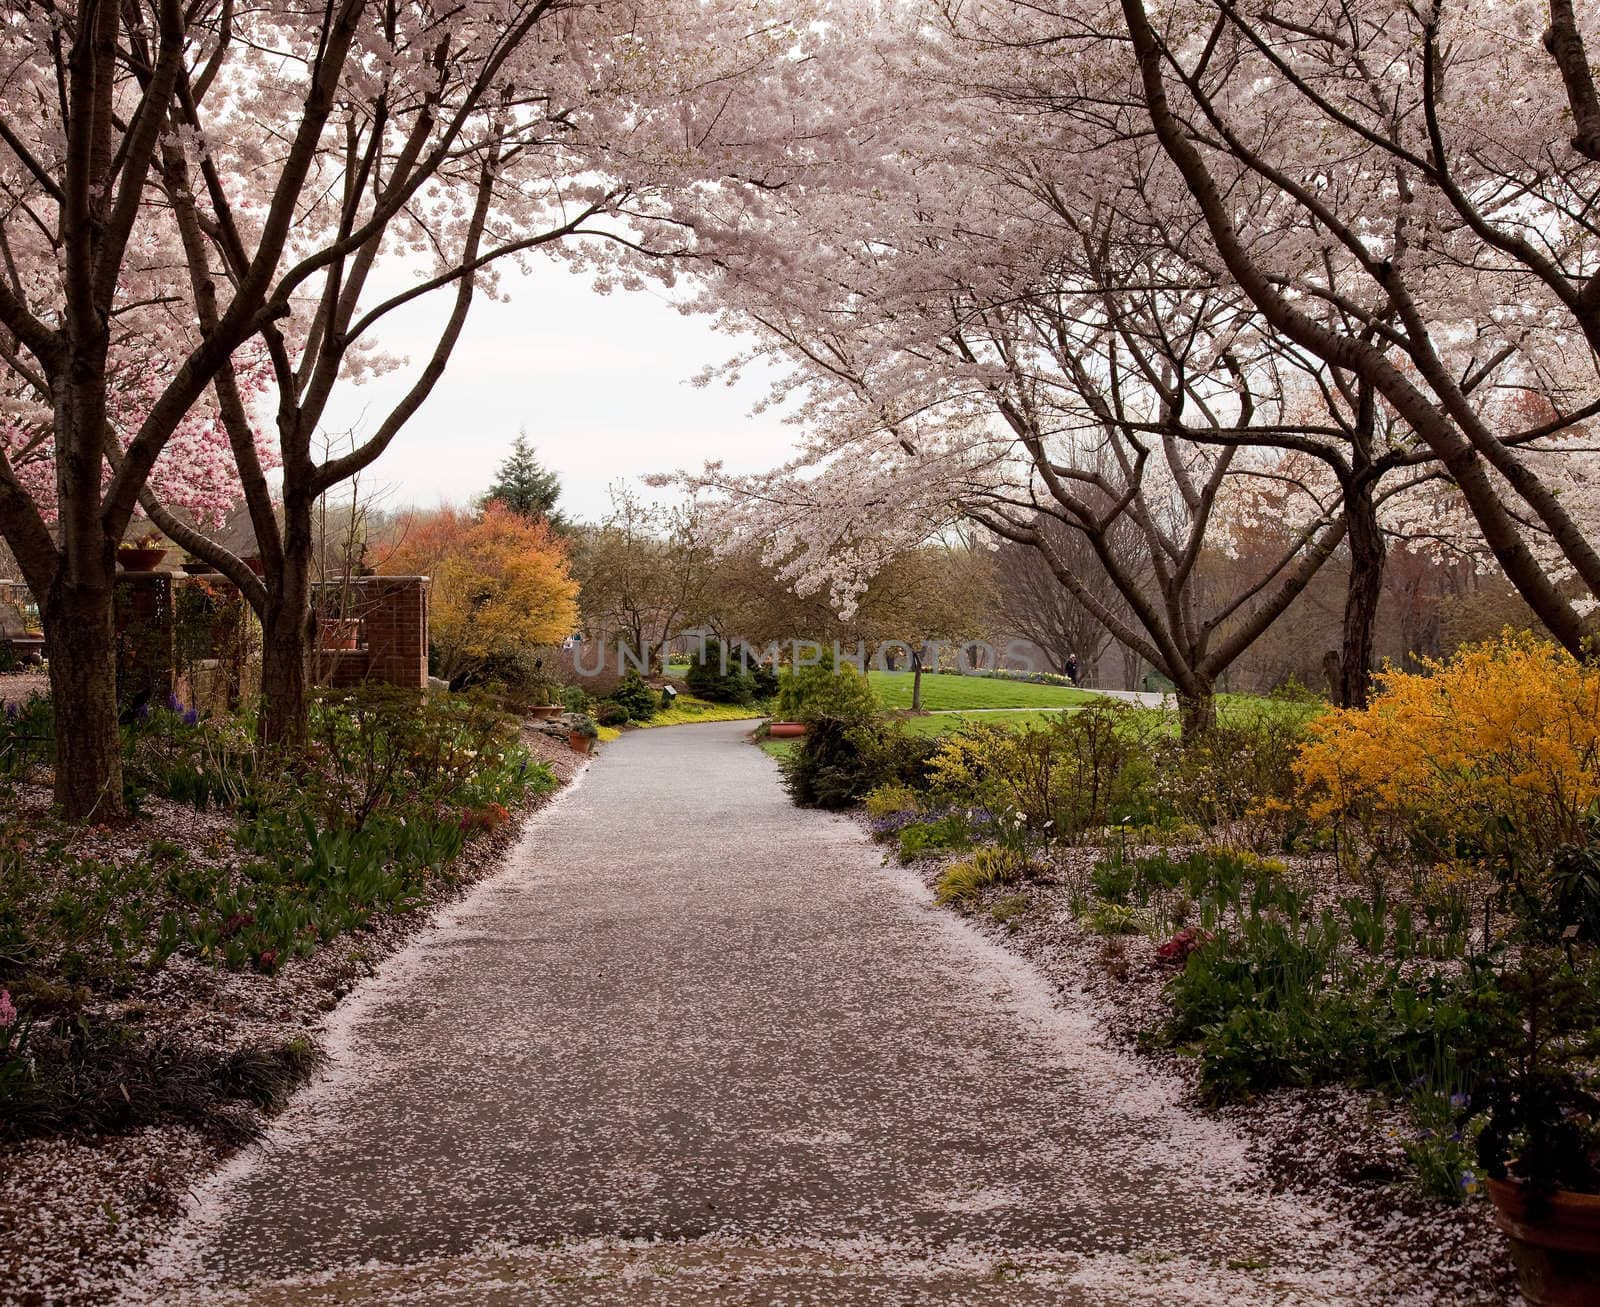 Cherry blossom petals fall on path by steheap